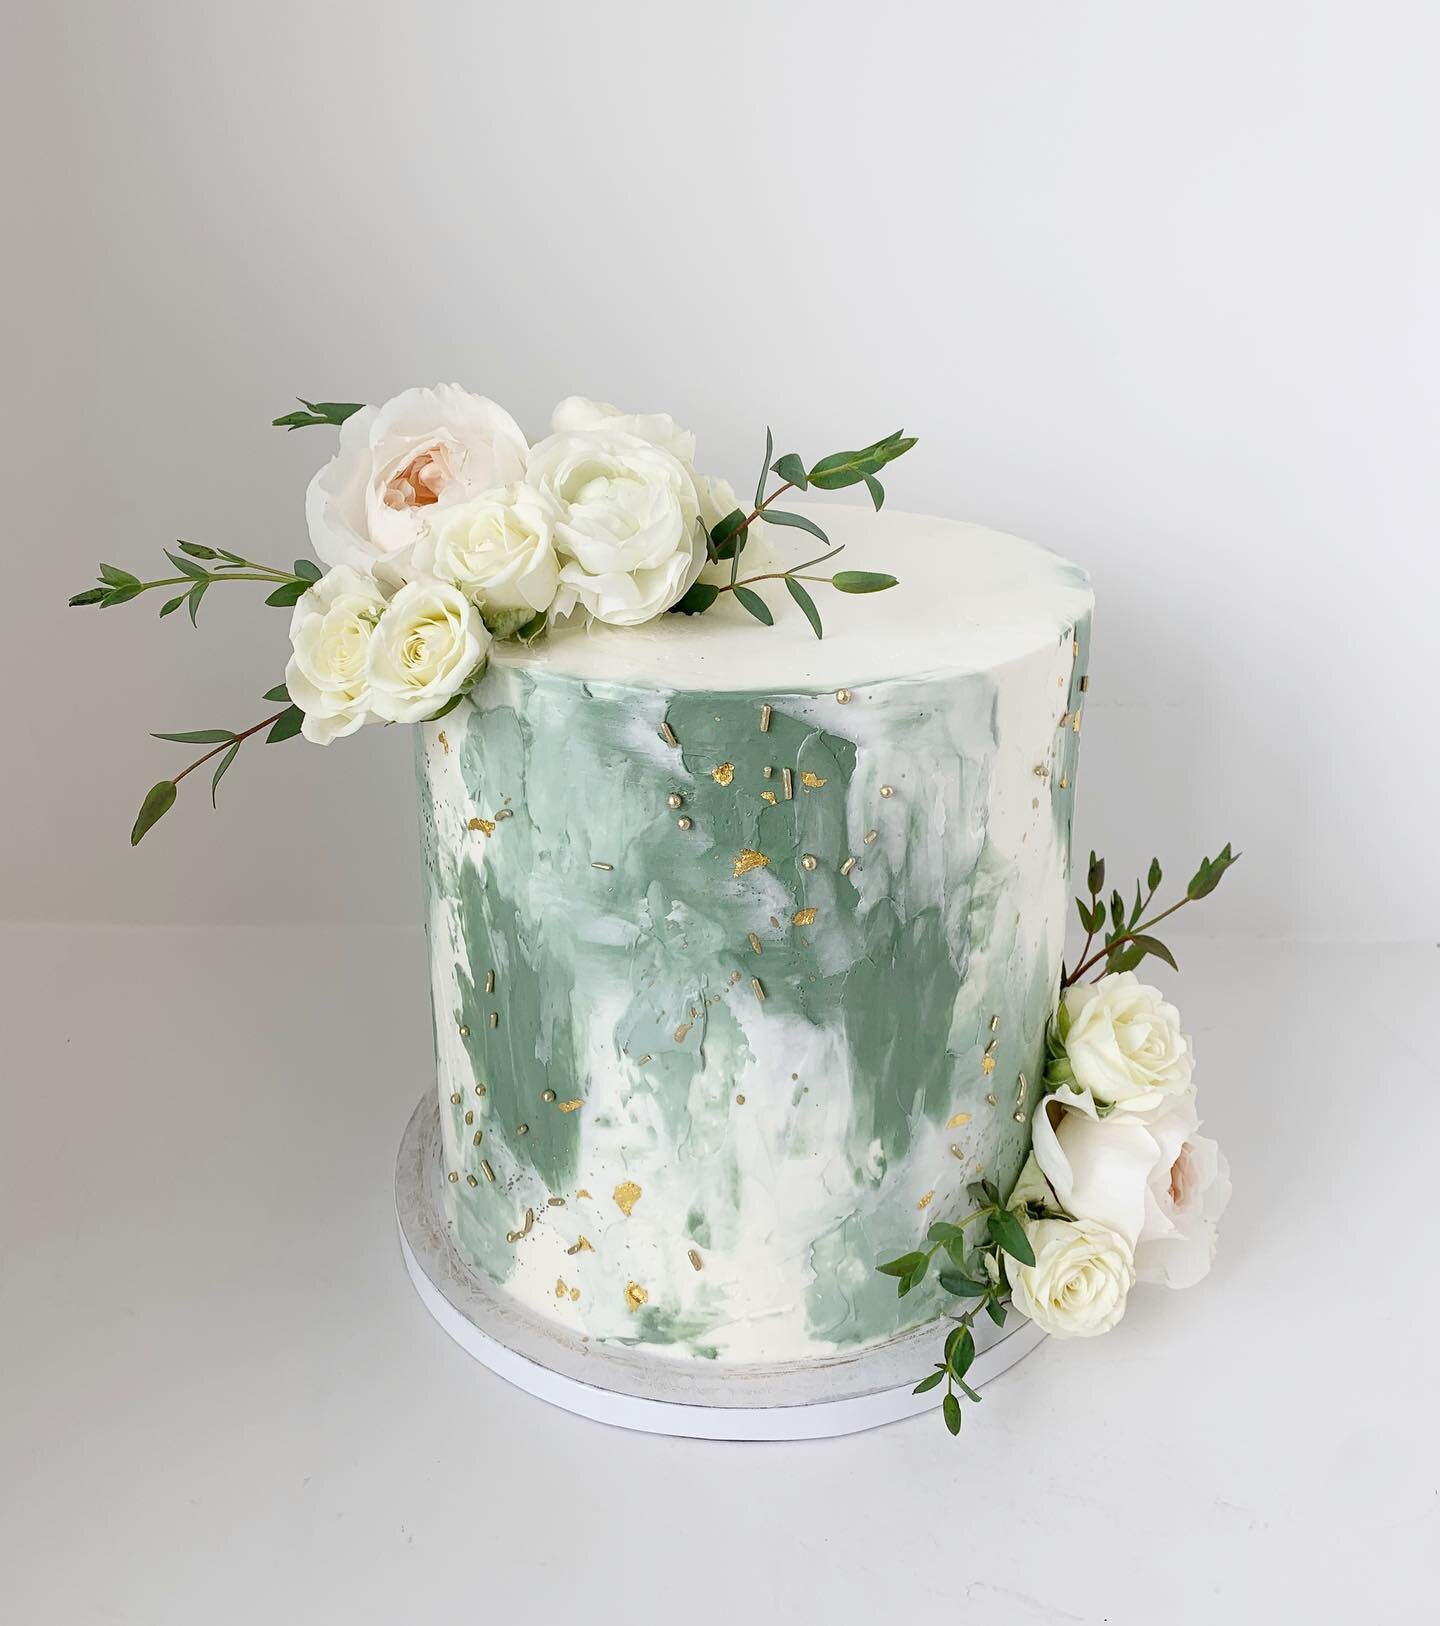 This sage toned beauty was a big girl 😍 extra tall 8&rdquo; cakes have been so popular lately as parties have gotten bigger again and our clients love a tall modern shape!
.
.
.
.
#houstoncakes #houstonbaker #houstonbakery #cakeart #floralcake #cake